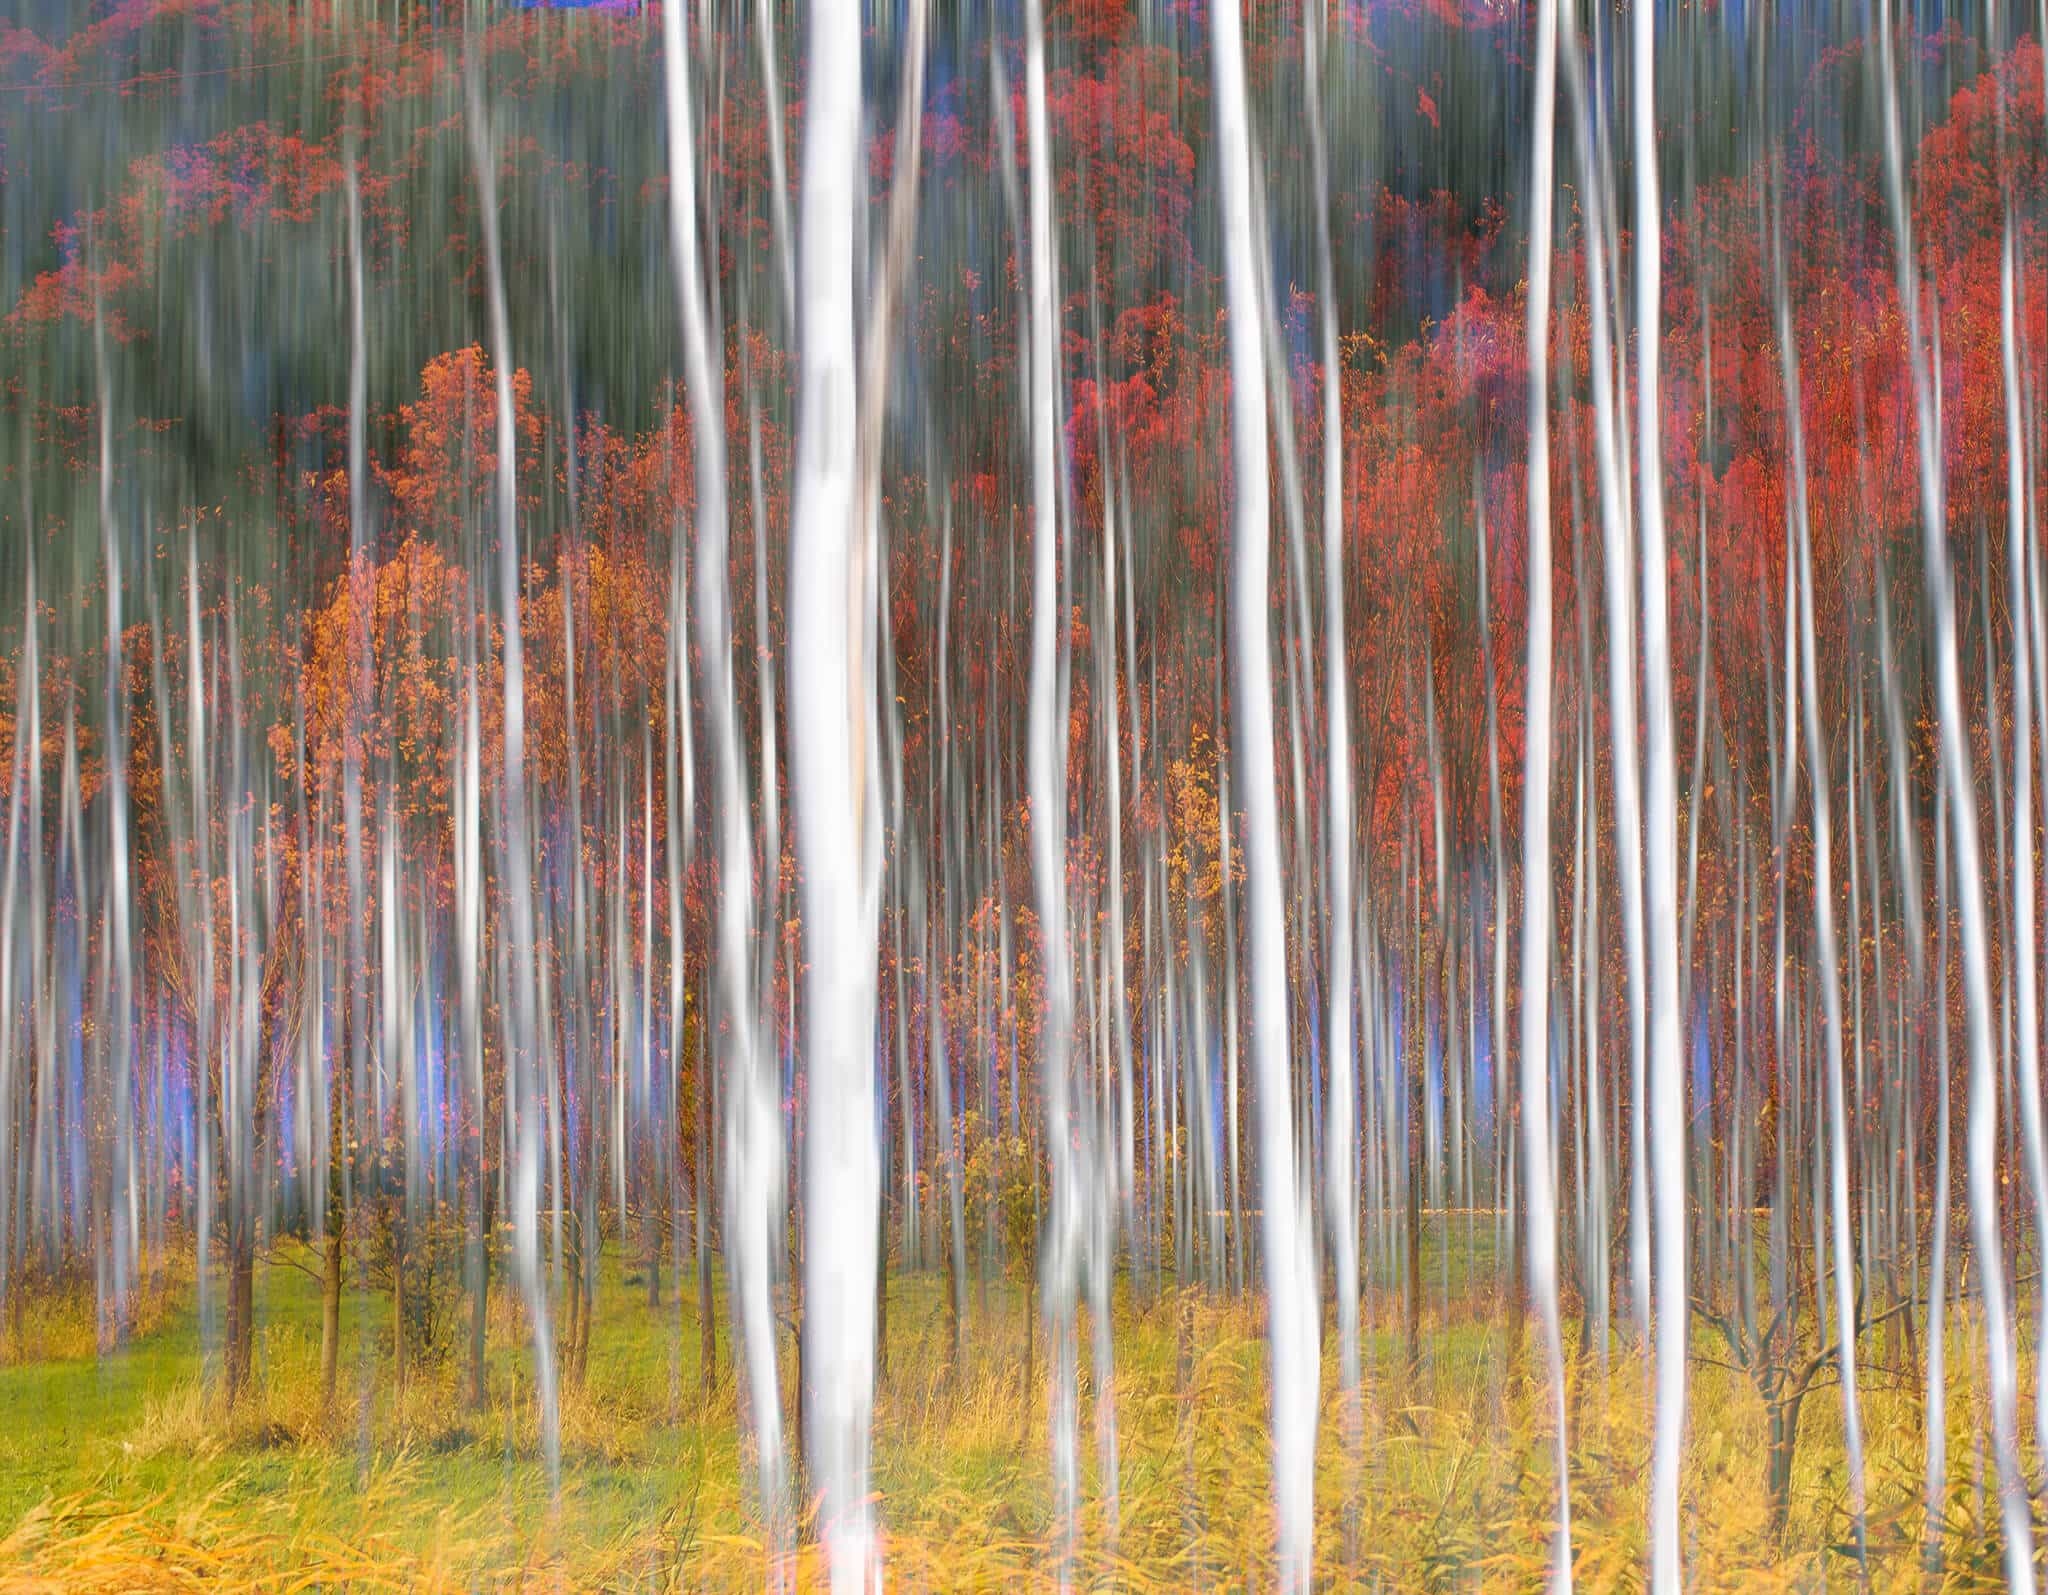 Blurred Trees with Fall Foliage